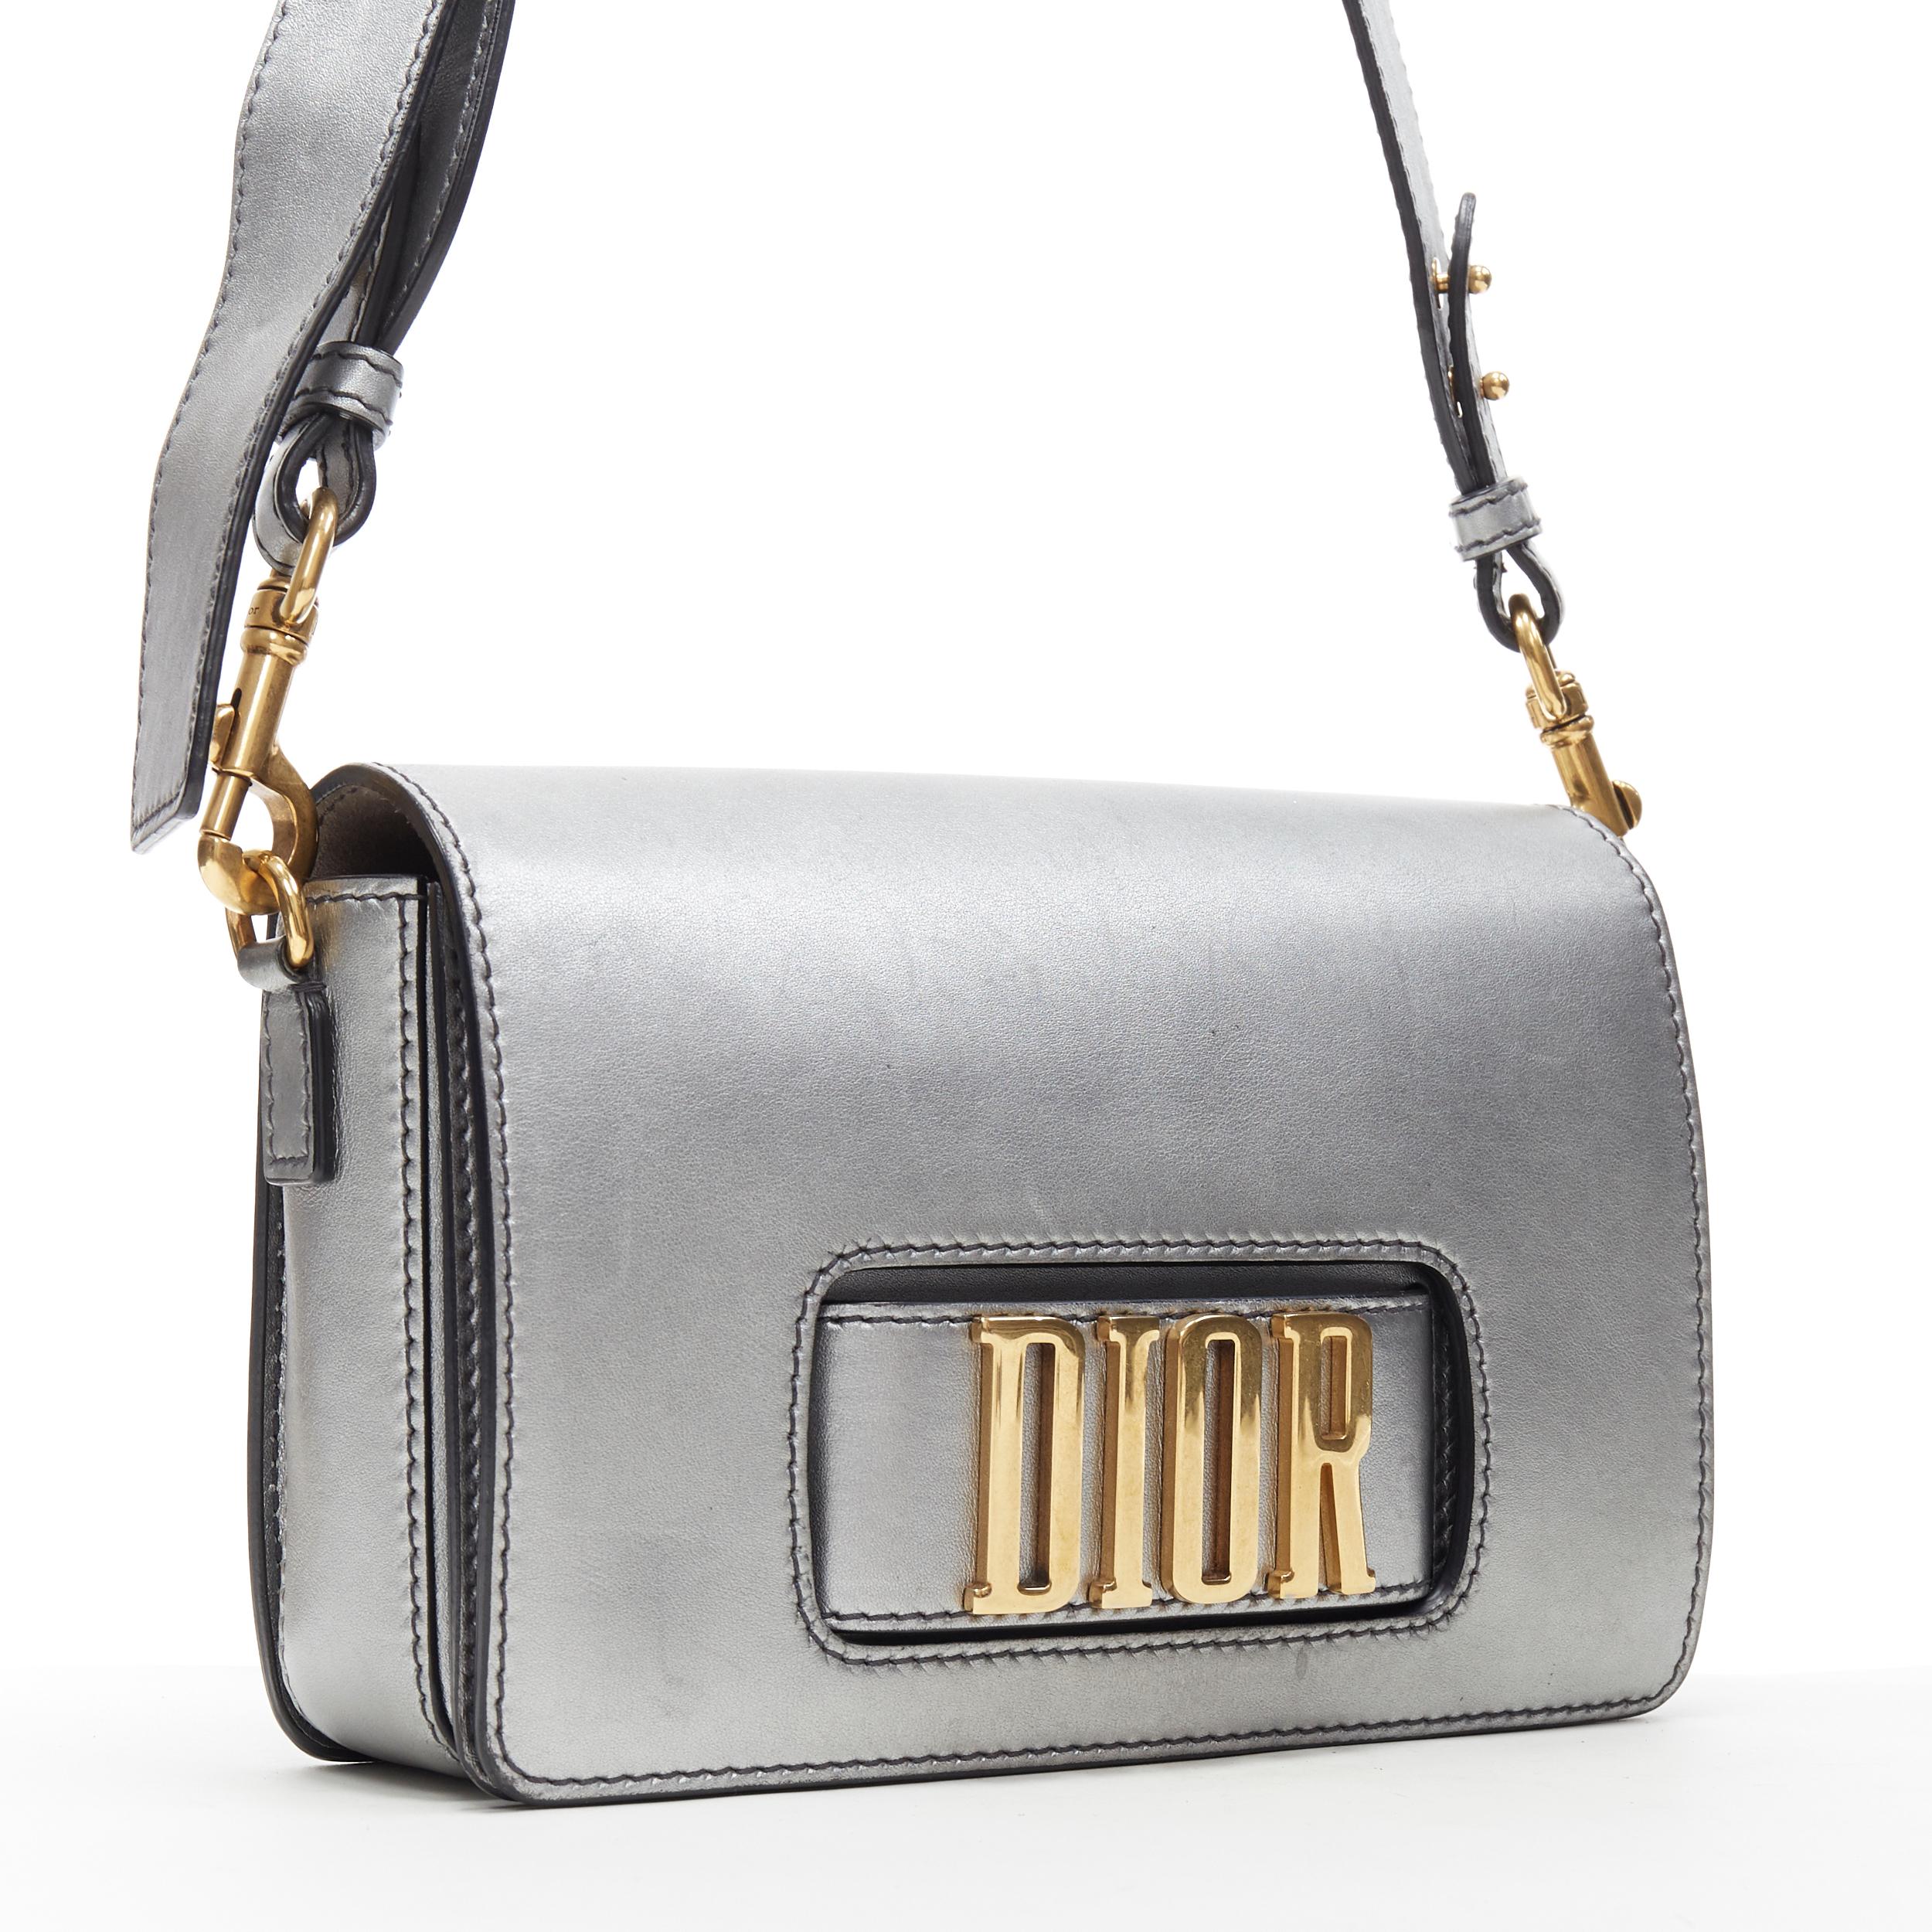 CHRISTIAN DIOR Dio(r)evolution silver leather gold logo strap flap crossbody bag
Brand: Christian Dior
Model Name / Style: Dio(r)evolution bag
Material: Leather
Color: Silver
Pattern: Solid
Closure: Magnetic
Extra Detail:
Made in: Italy

CONDITION: